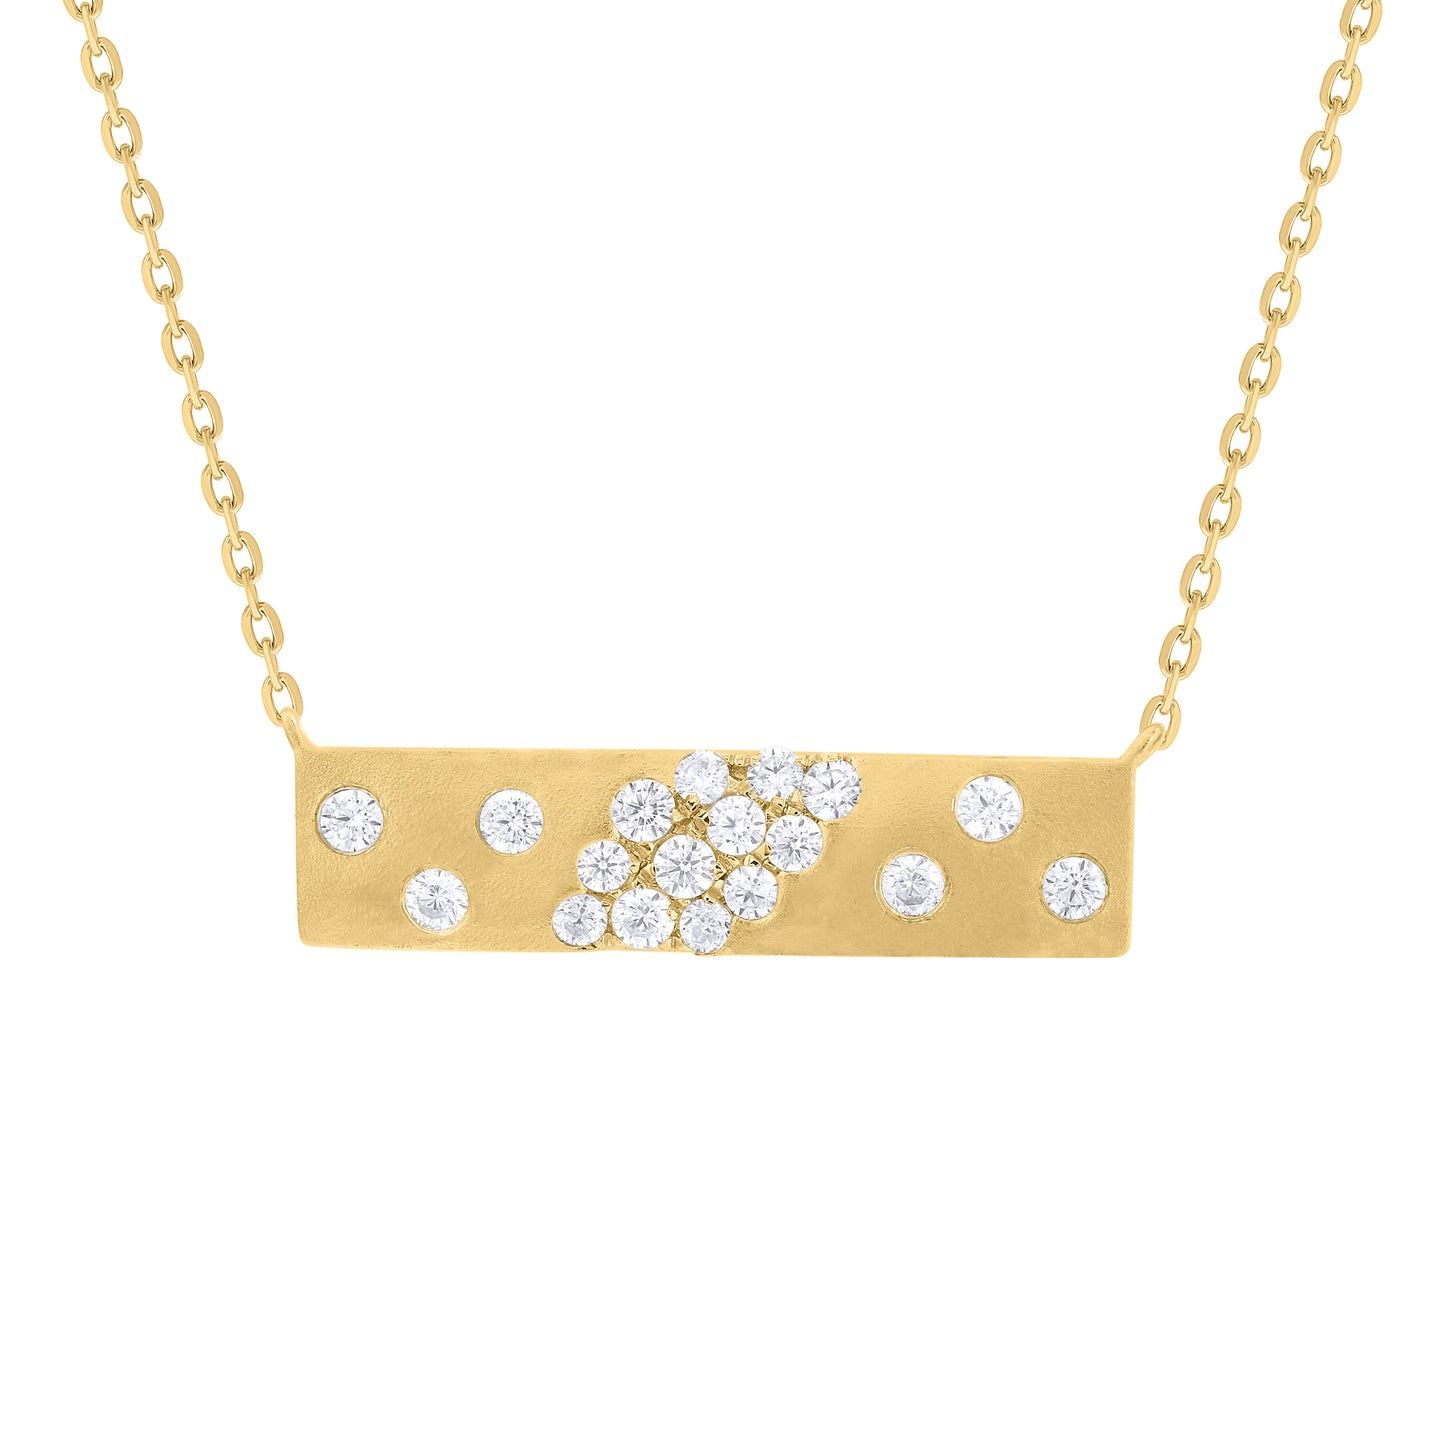 14K Gold Bar Necklace with Diamonds